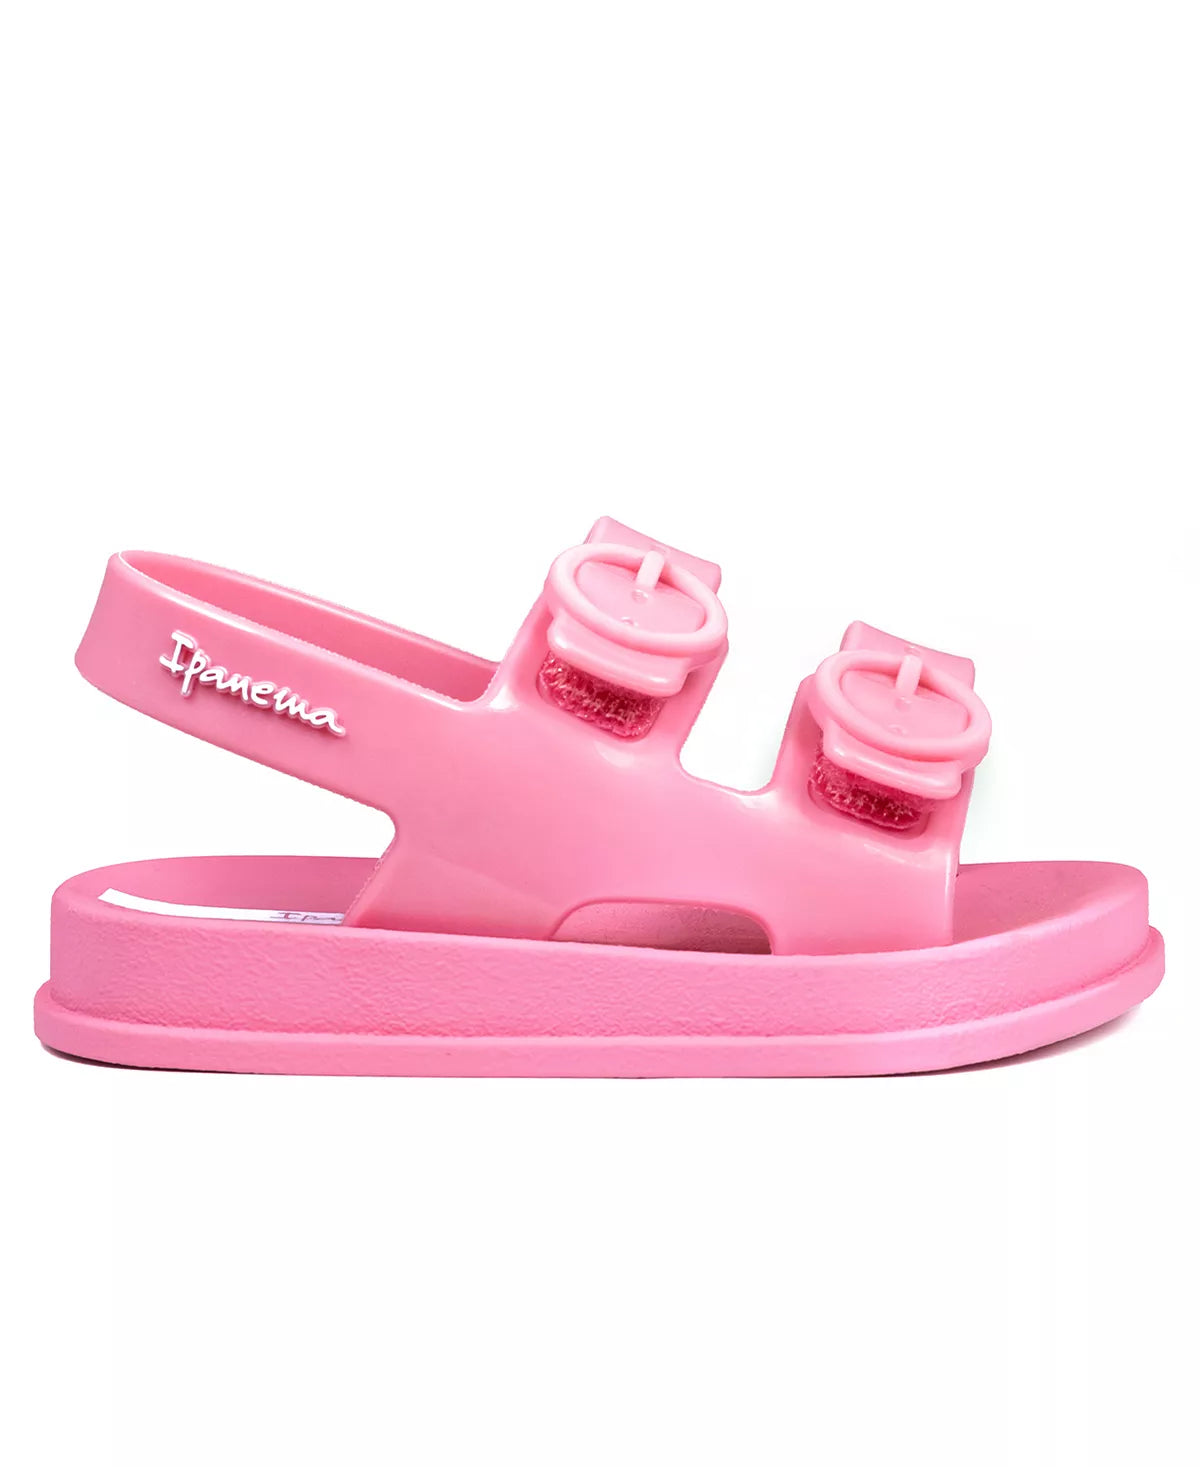 Follow Baby Sandal in Pink